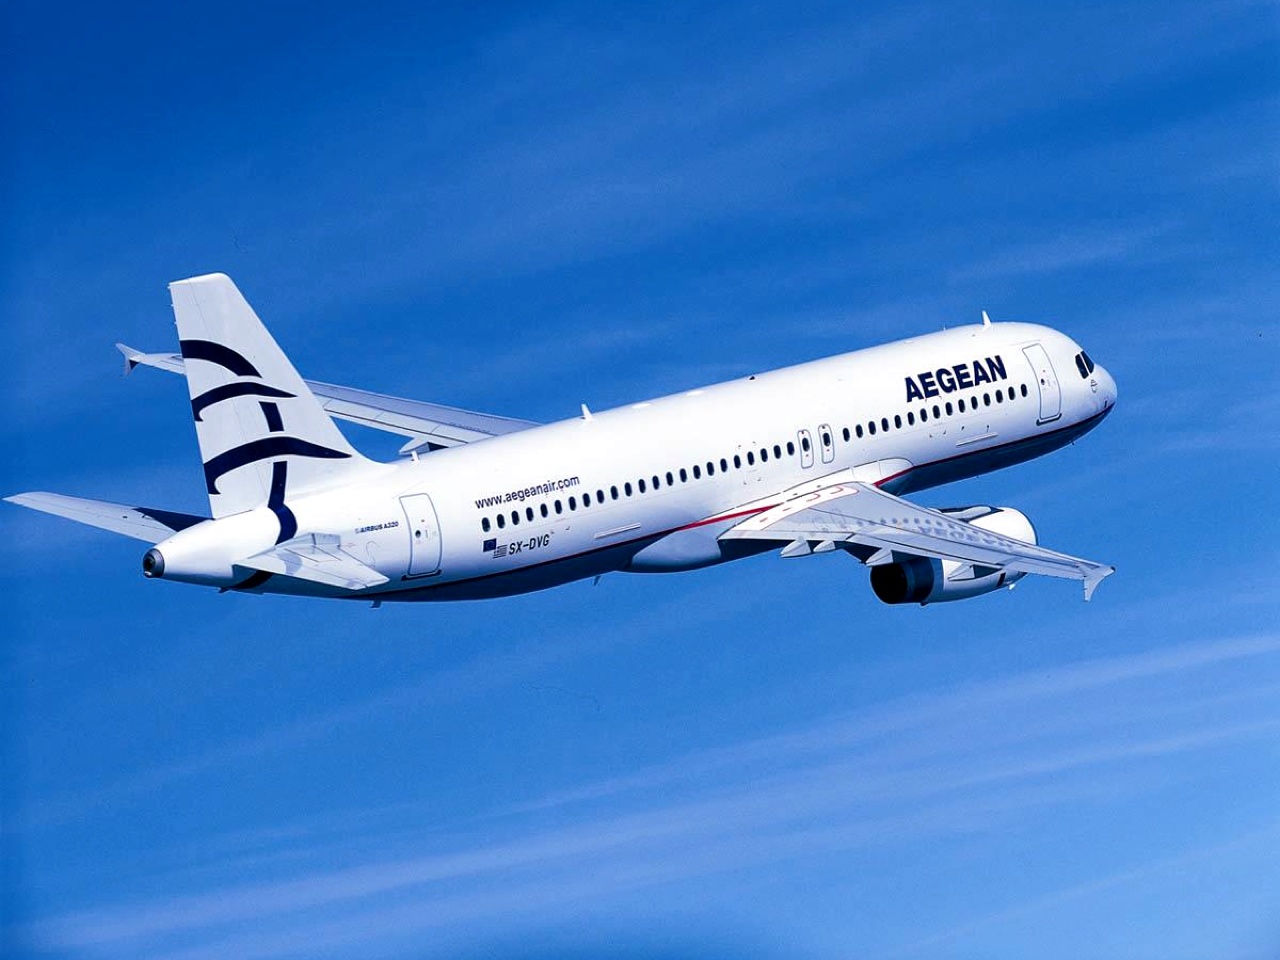 AEGEAN - New Destinations and 700,000 Additional Seats in 2019